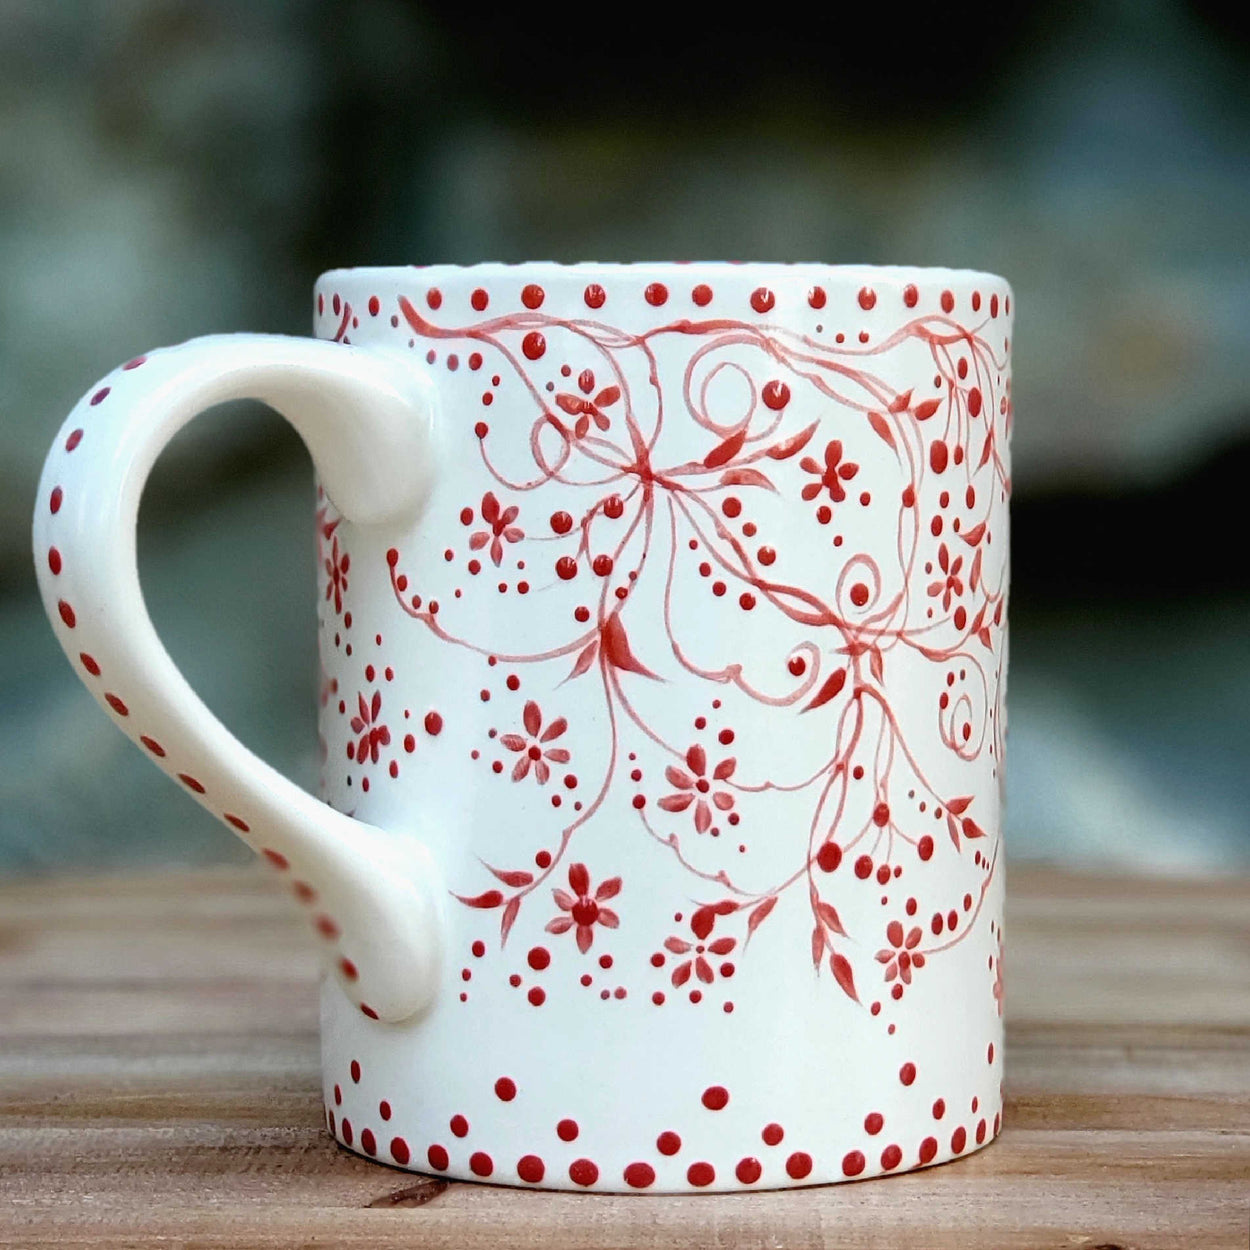 Hand painted vintage inspired red and white mug. Trailing tiny vines make this delicate all over design very special. A soft satin glaze gives it such a nice feel for that prefect cuppa. 16 oz kiln fired ceramic mug